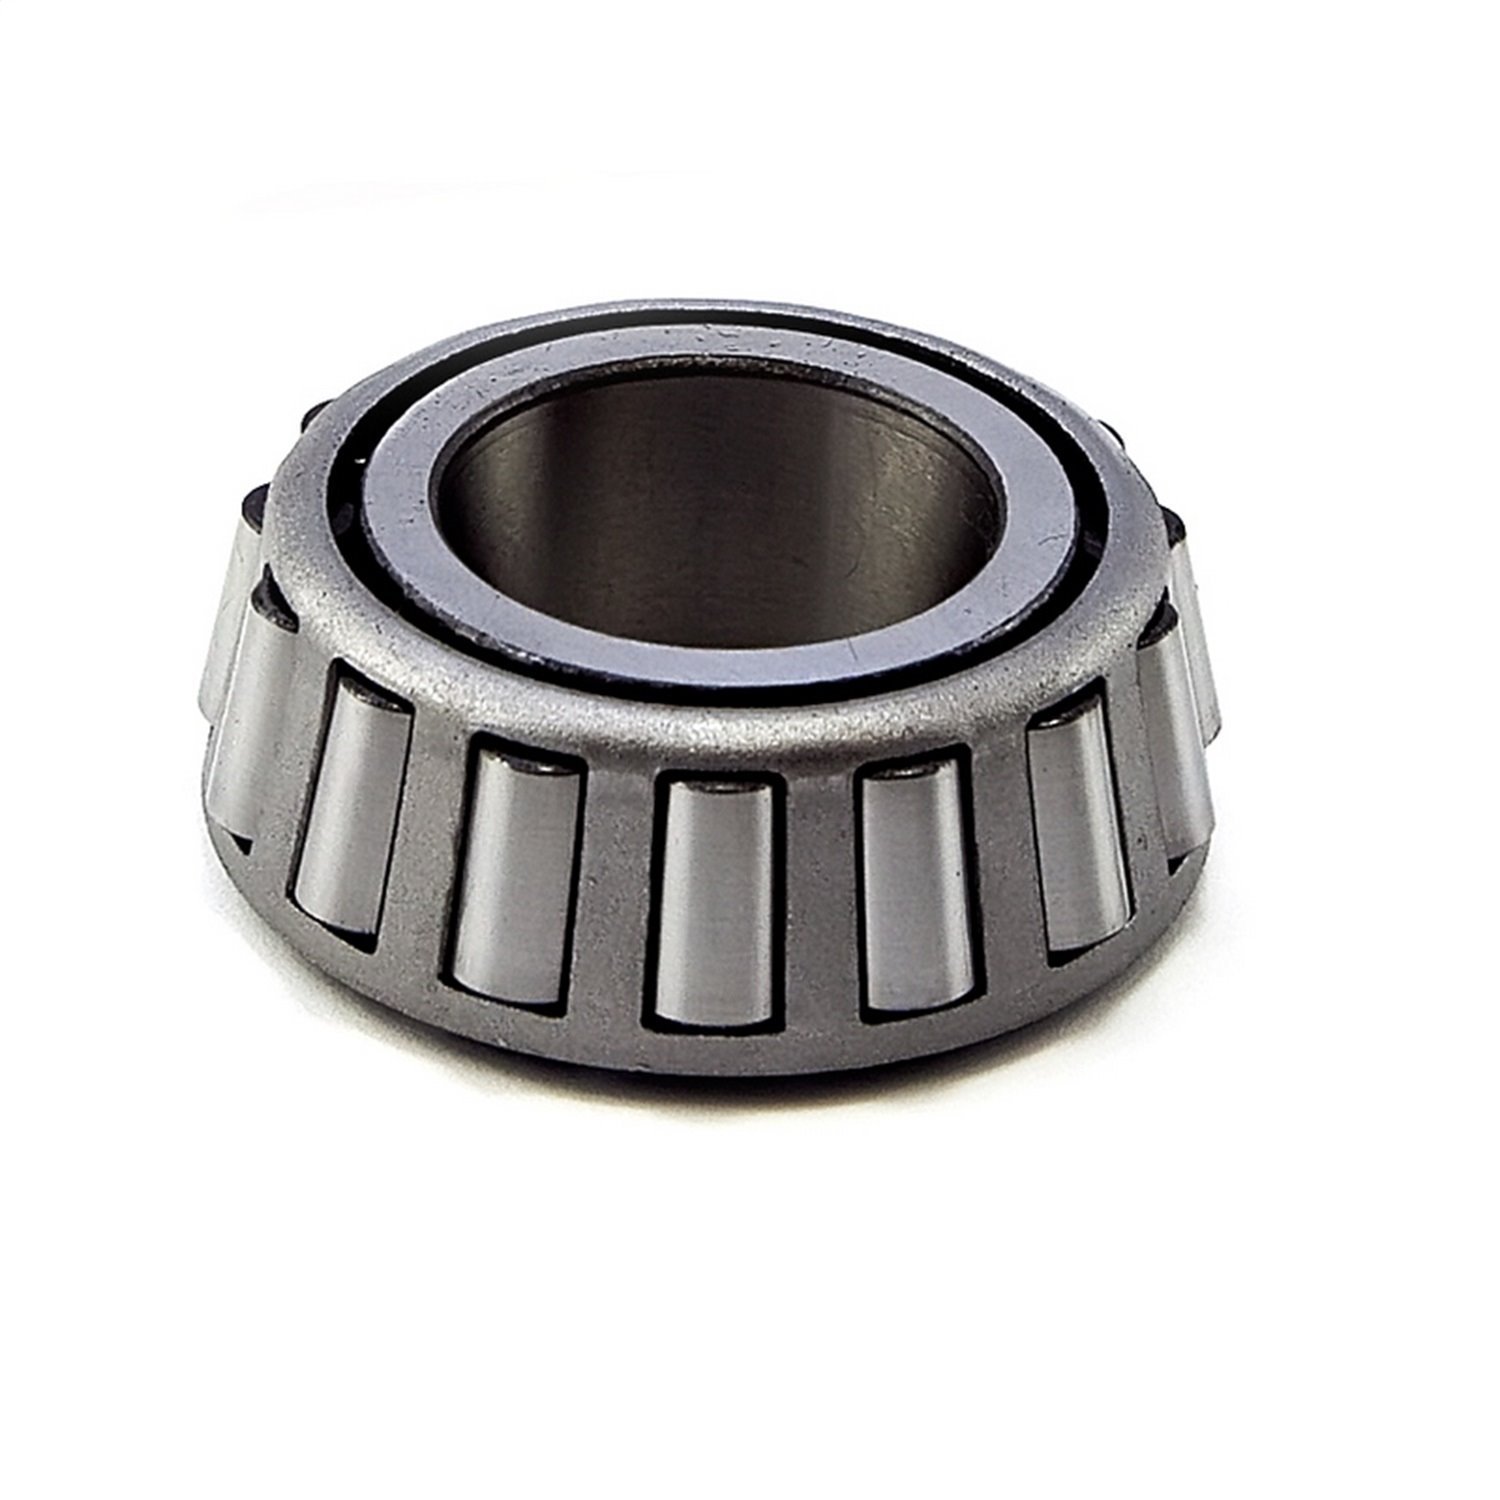 This outer output shaft bearing cone from Omix-ADA fits the Dana 20 and Dana 300 transfer cases in 72-86 Jeep CJ models.